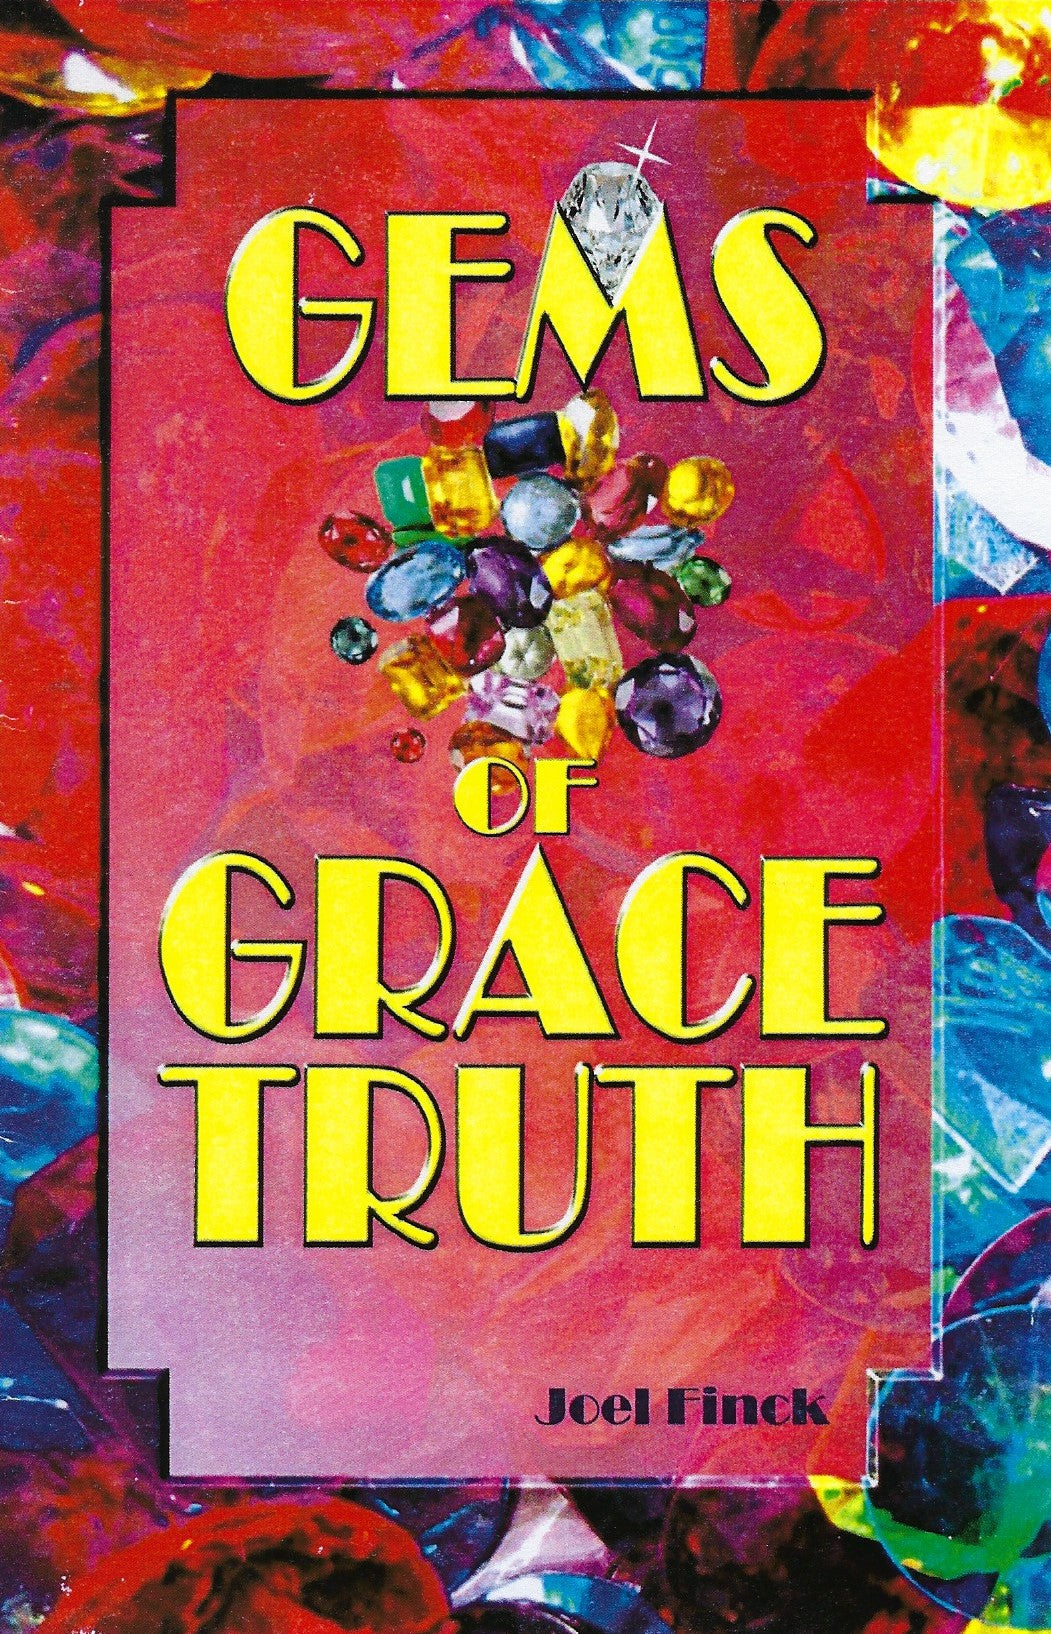 Gems of Grace Truth (expanded version)